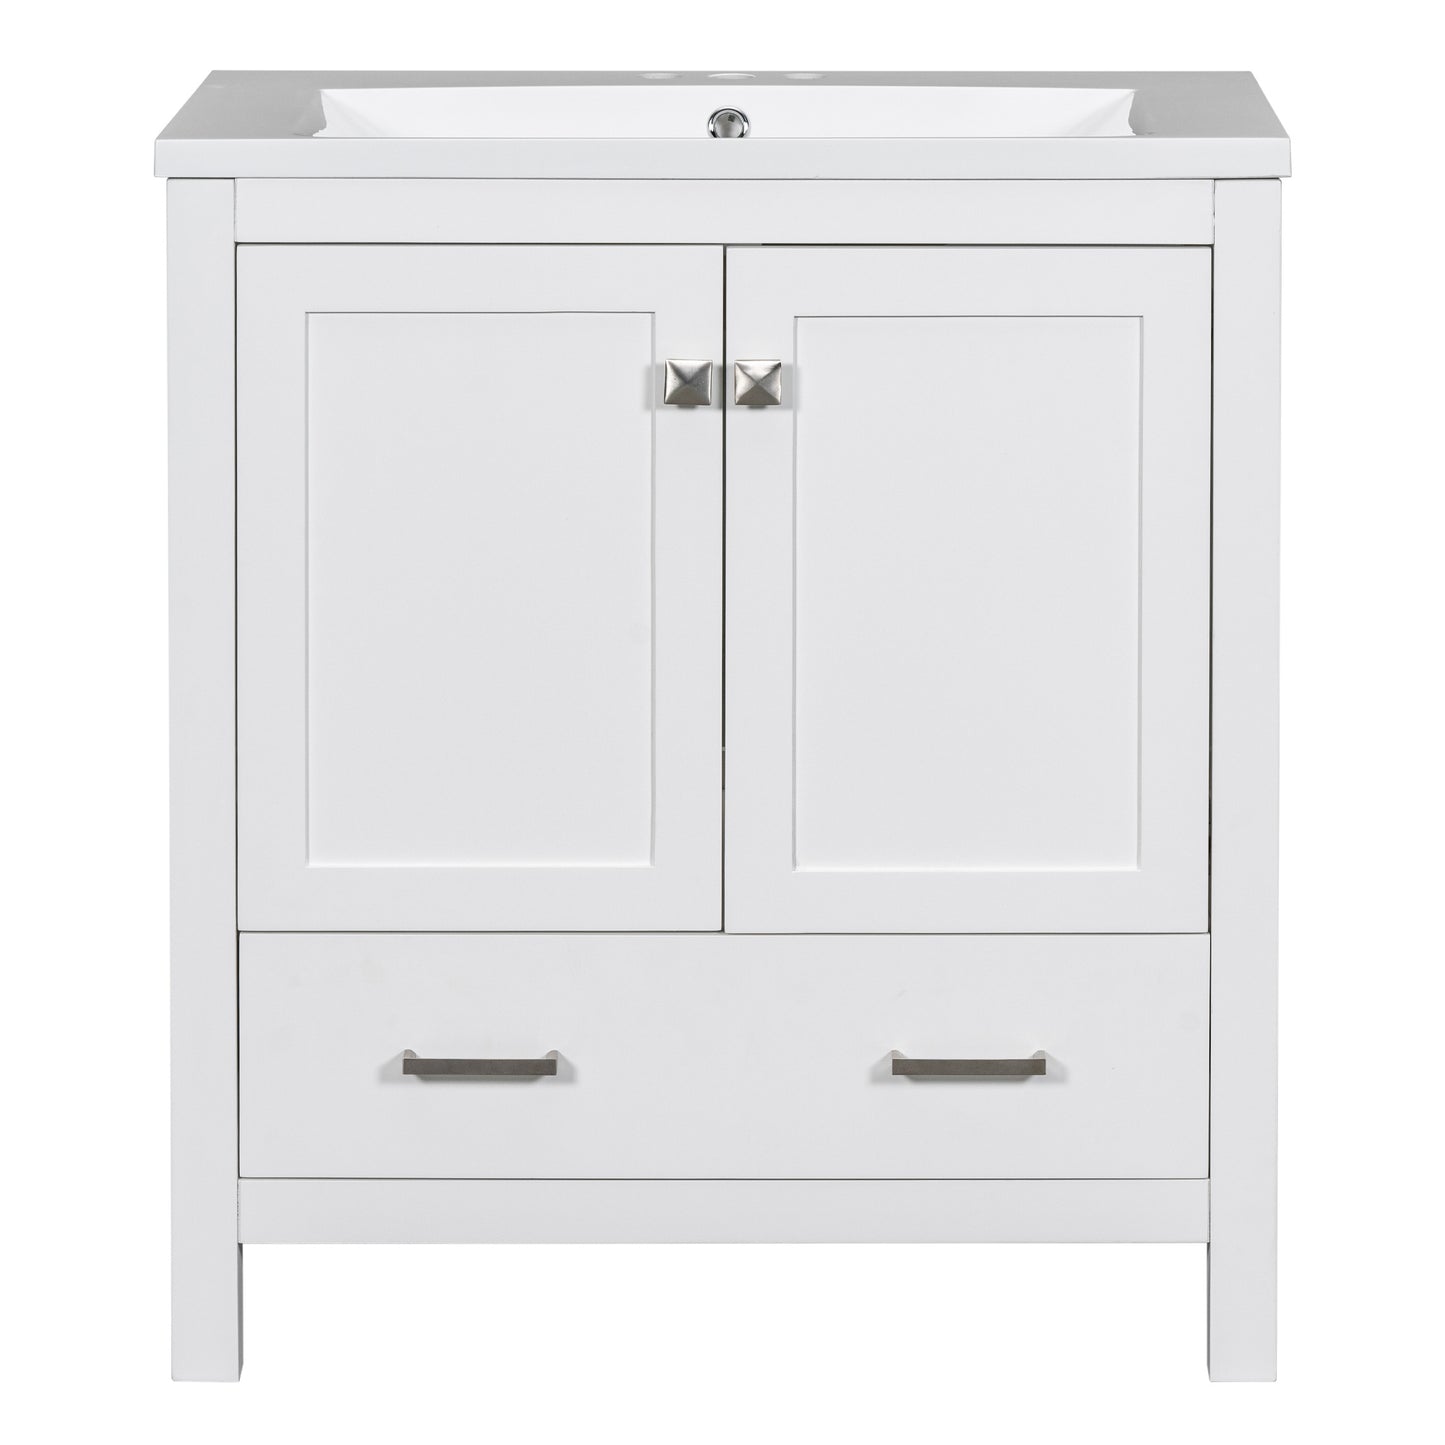 30" White Bathroom Vanity with Single Sink, Combo Cabinet Undermount Sink, Bathroom Storage Cabinet with 2 Doors and a Drawer, Soft Closing, Multifunctional Storage, Solid Wood Frame